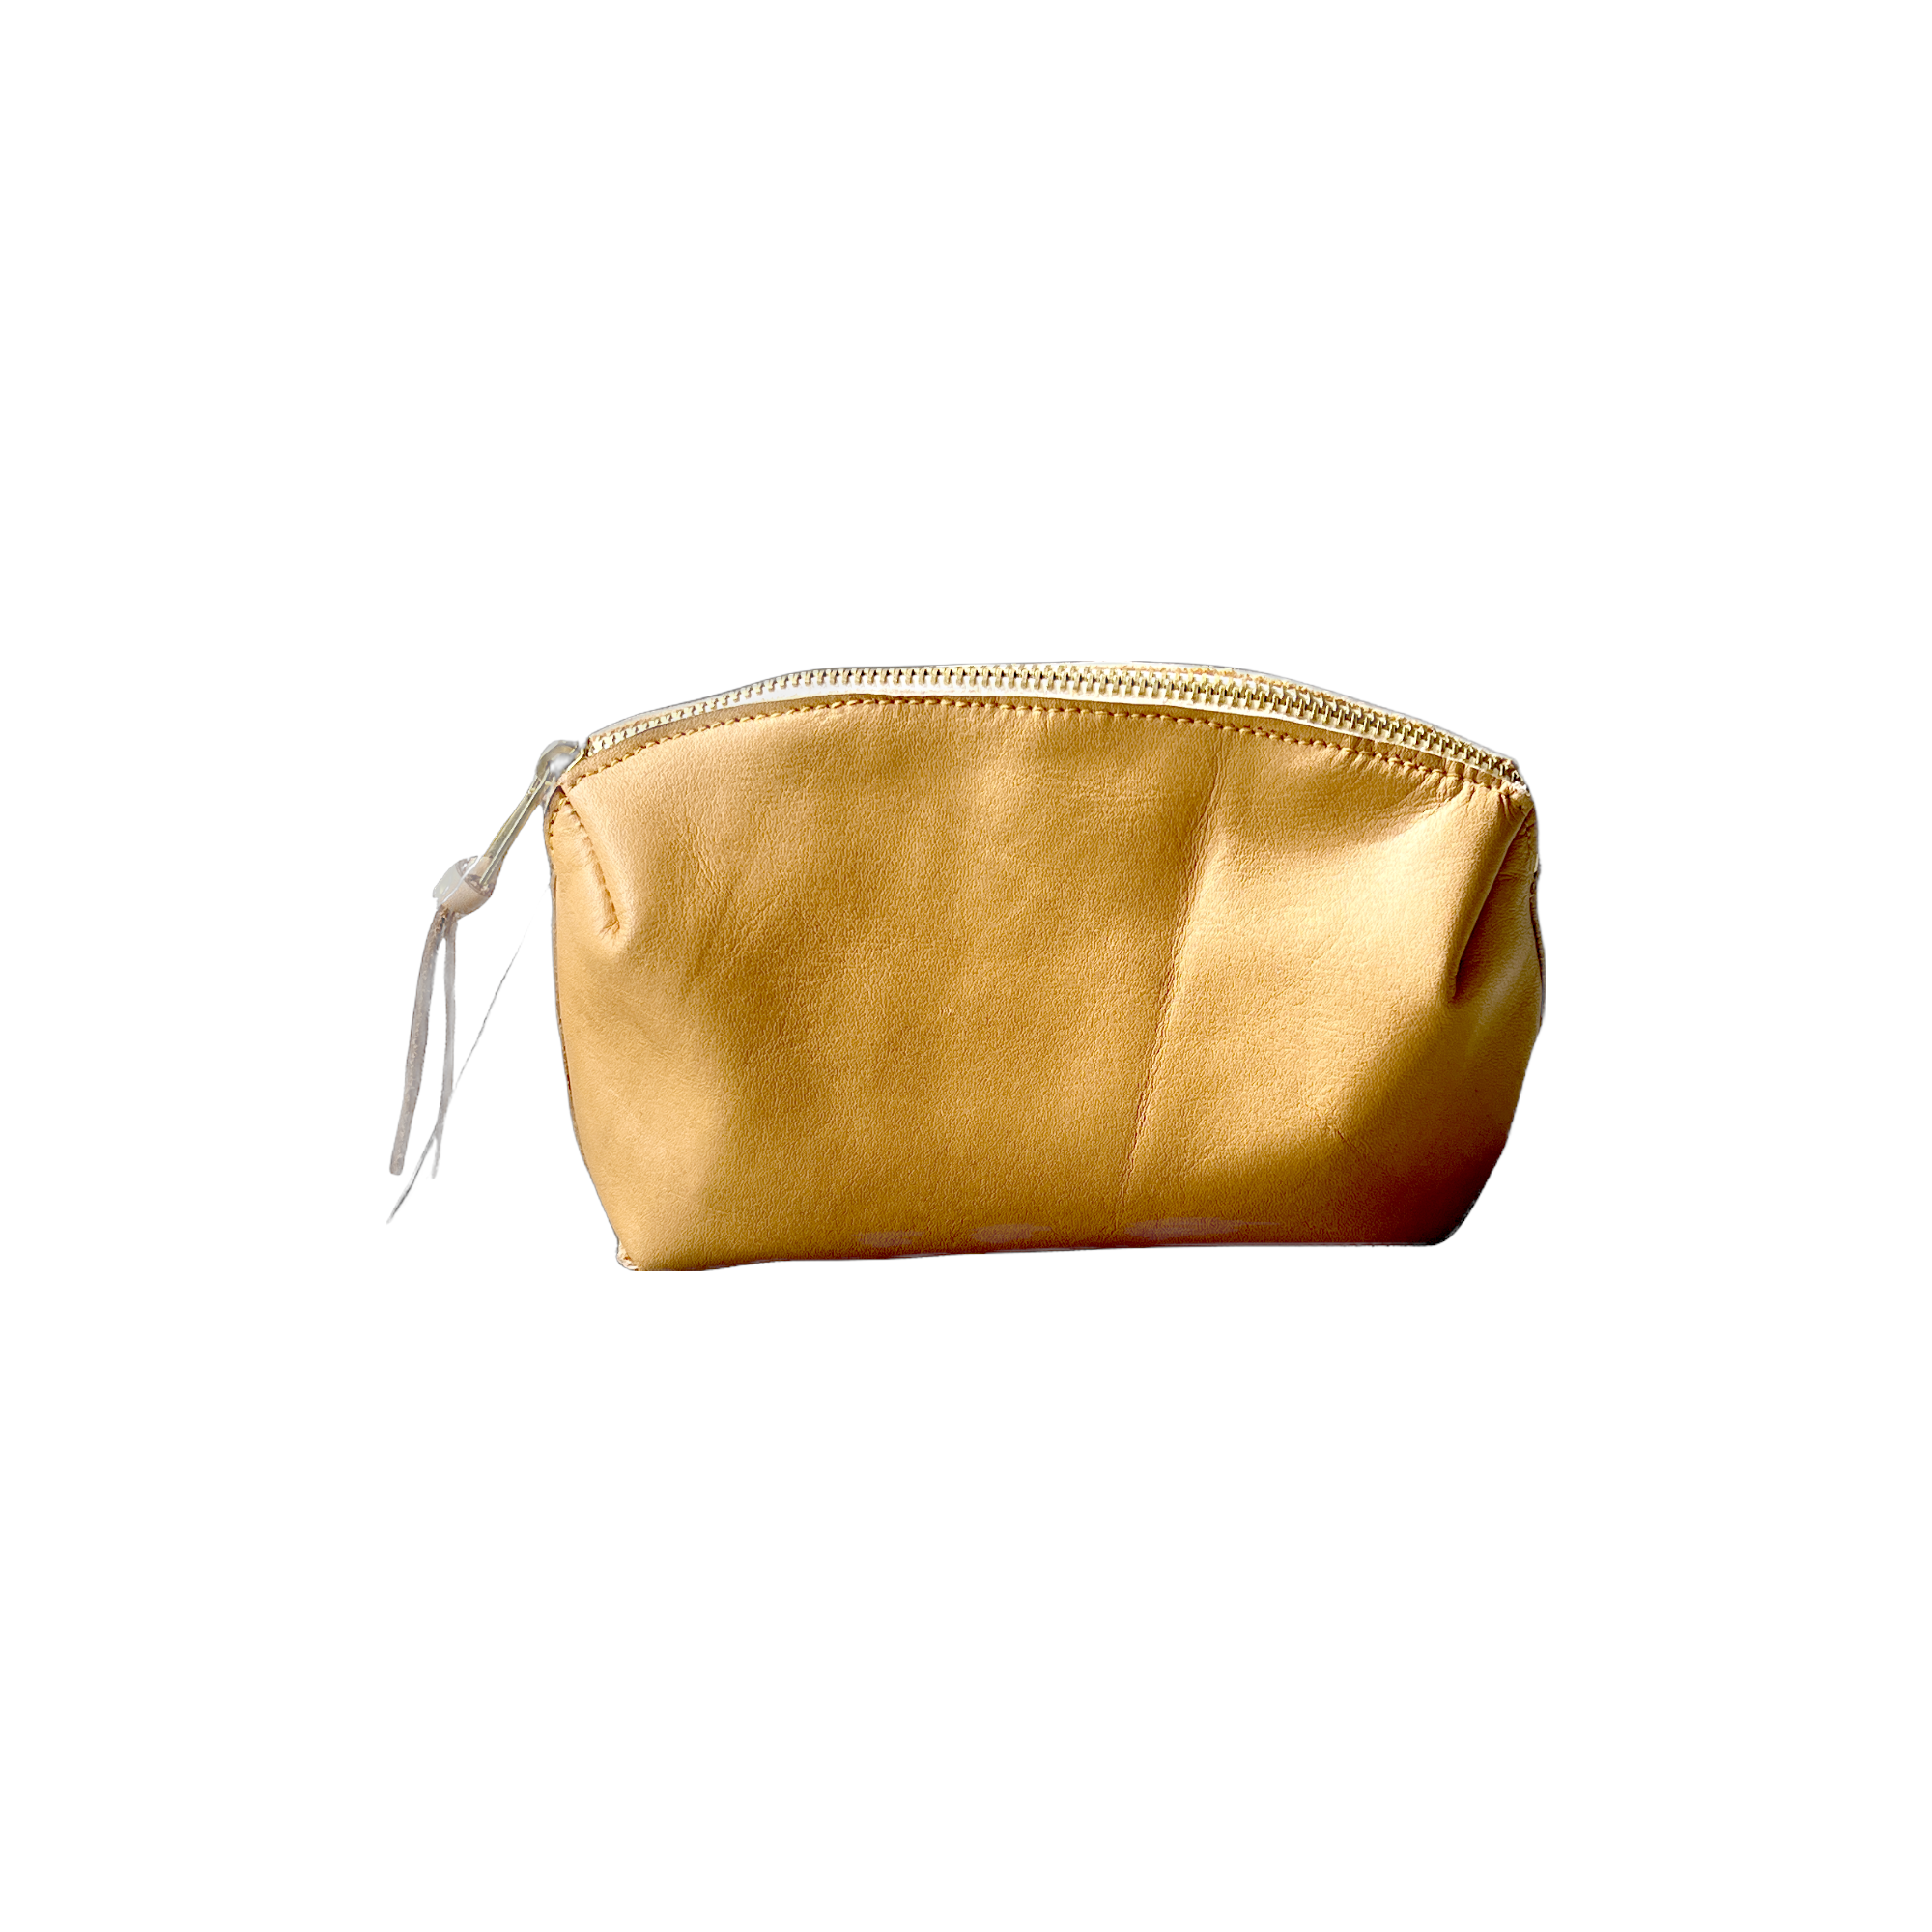 Pod Pouch in Tan Leather